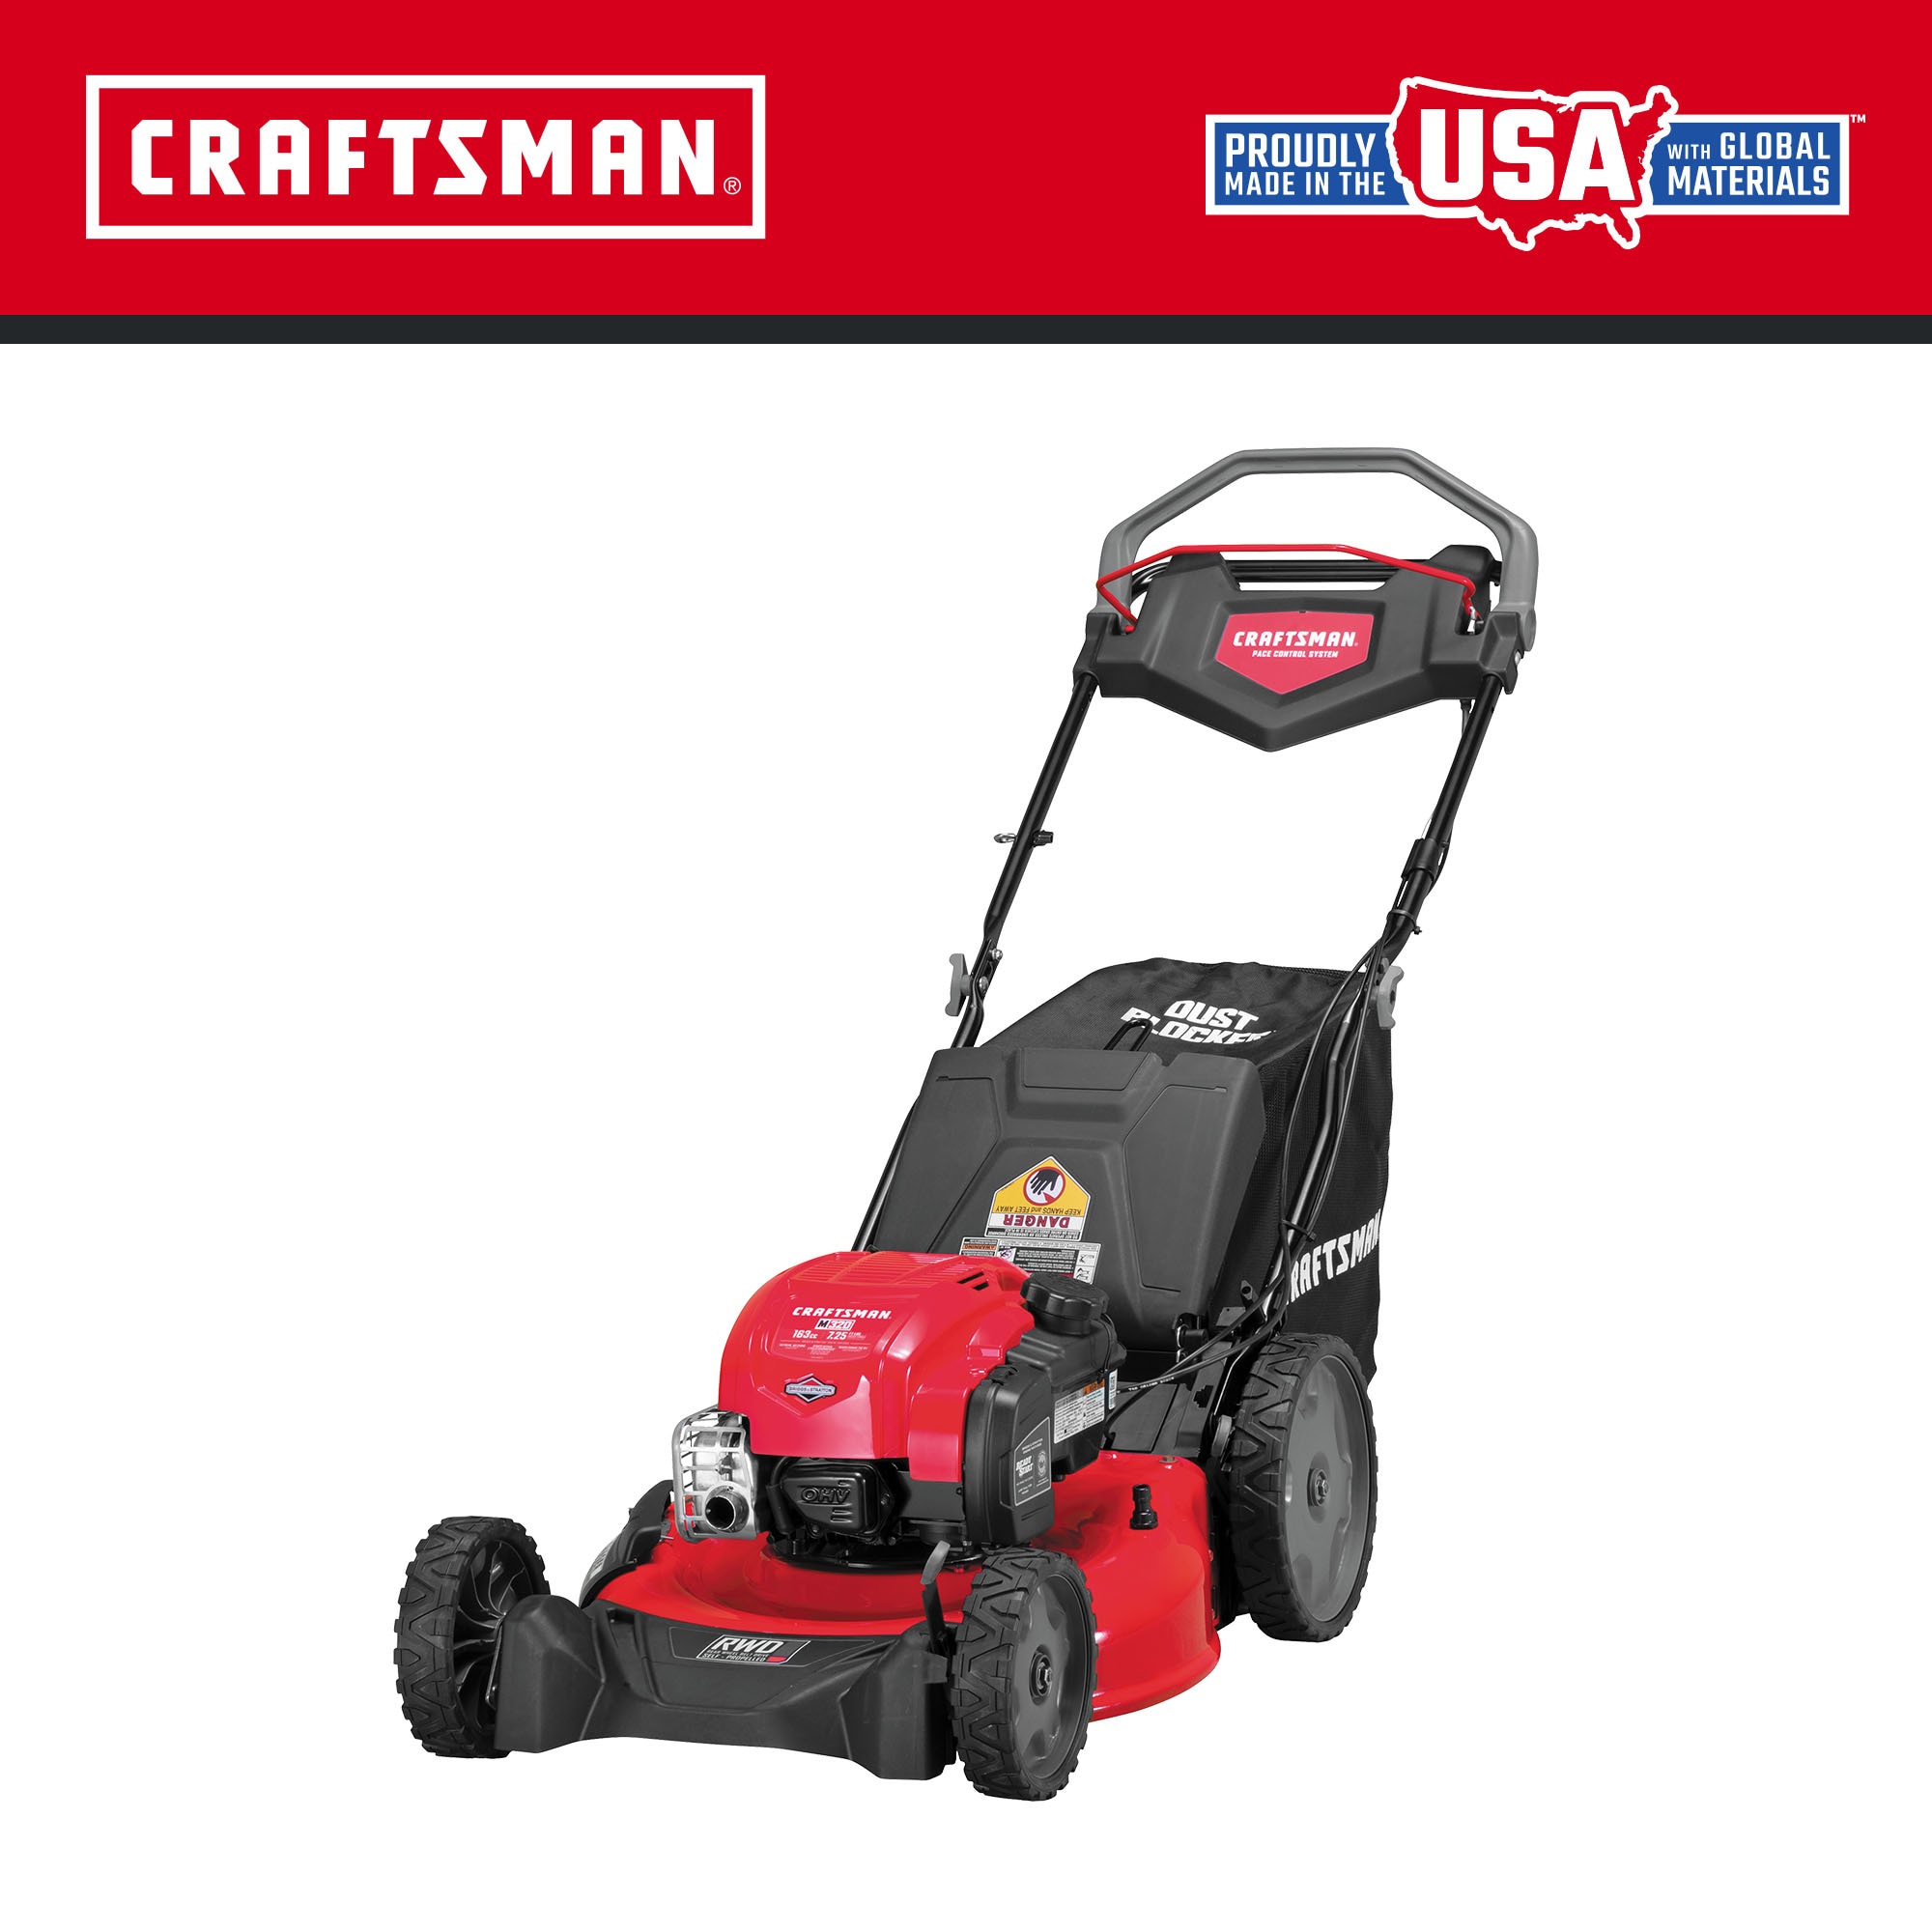 CRAFTSMAN M230 21-in Gas Self-propelled Lawn Mower with 163-cc